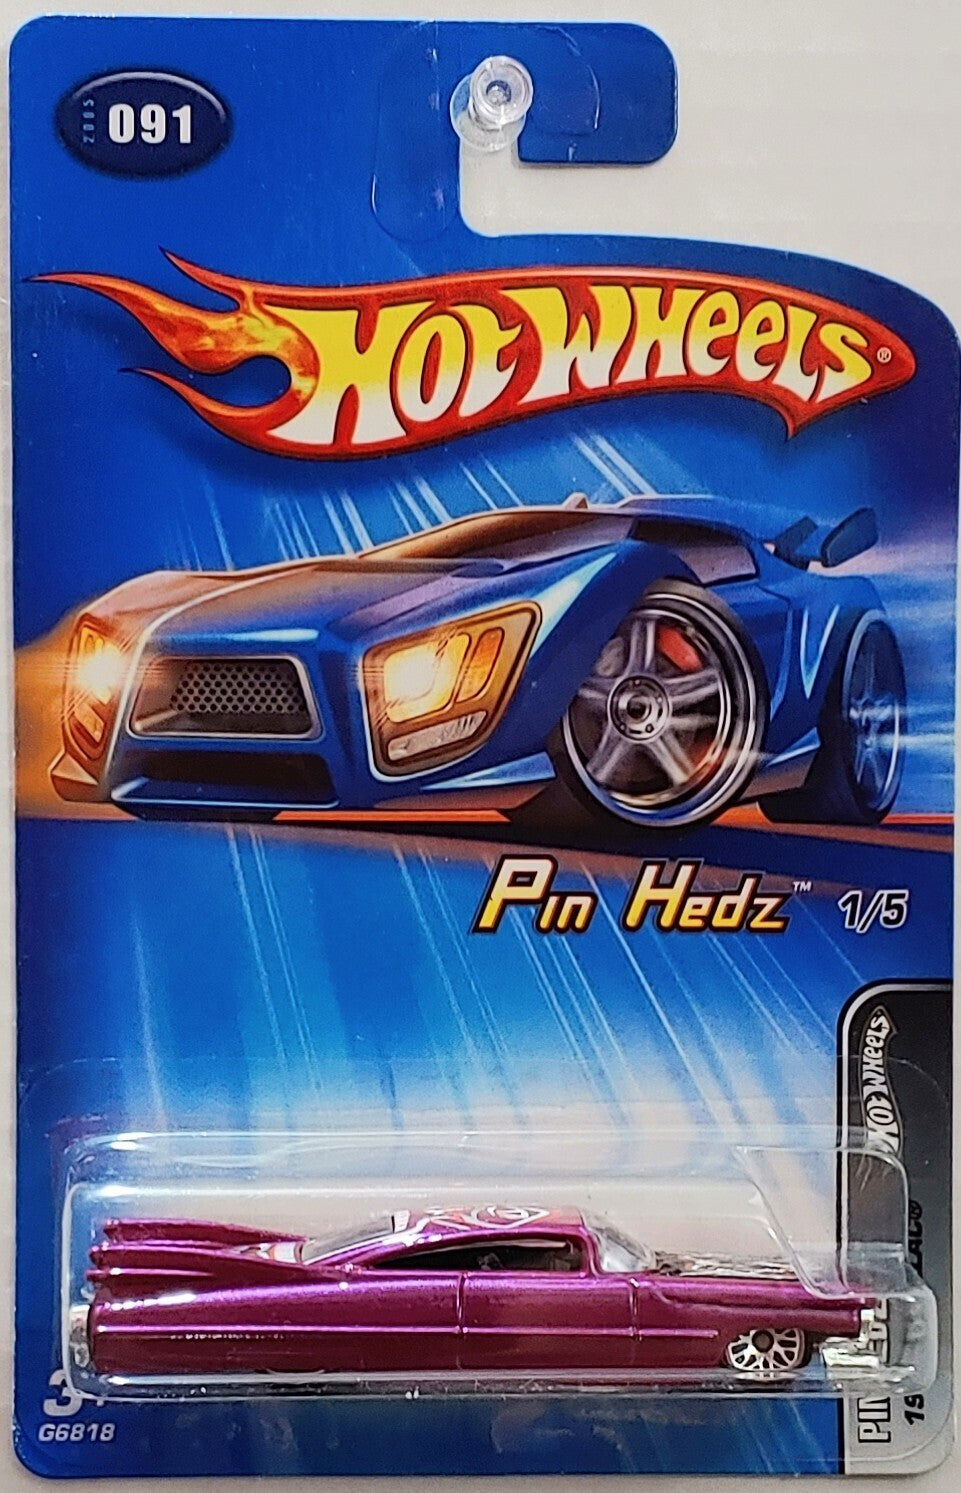 Hot Wheels 2005 - Collector # 091/183 - Pin Hedz 1/5 - 1959 Cadillac - Magenta - Lace Wire Wheels